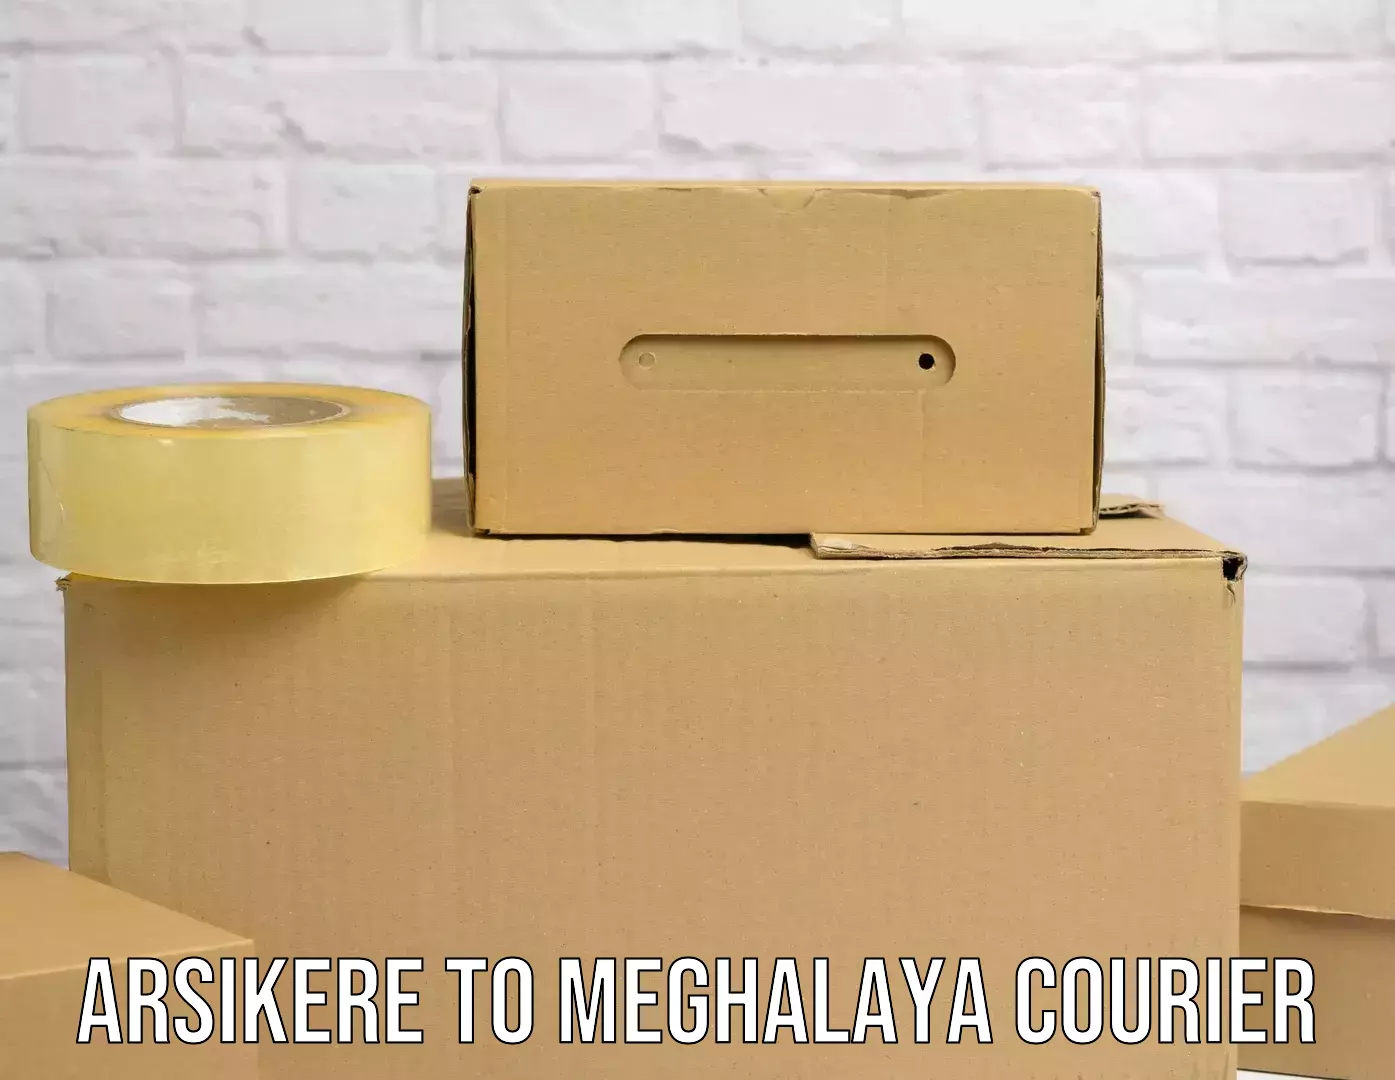 Global shipping networks Arsikere to Meghalaya